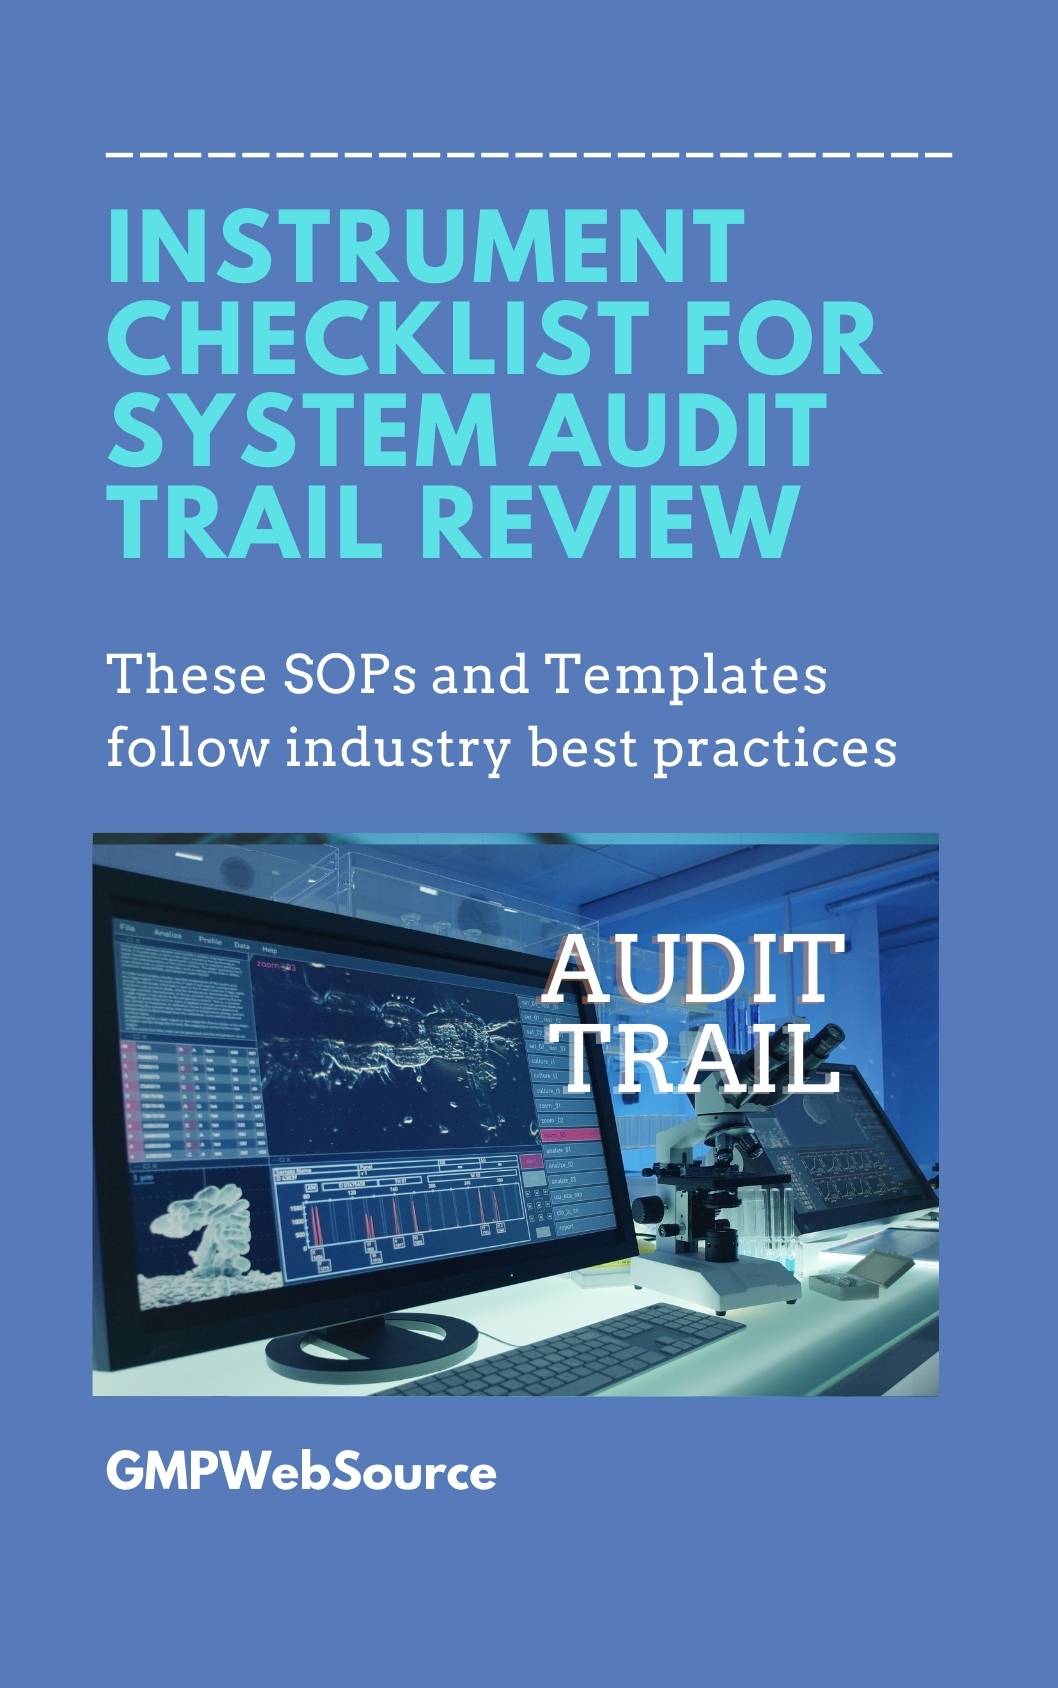 Instrument Checklist for System Audit Trail Review